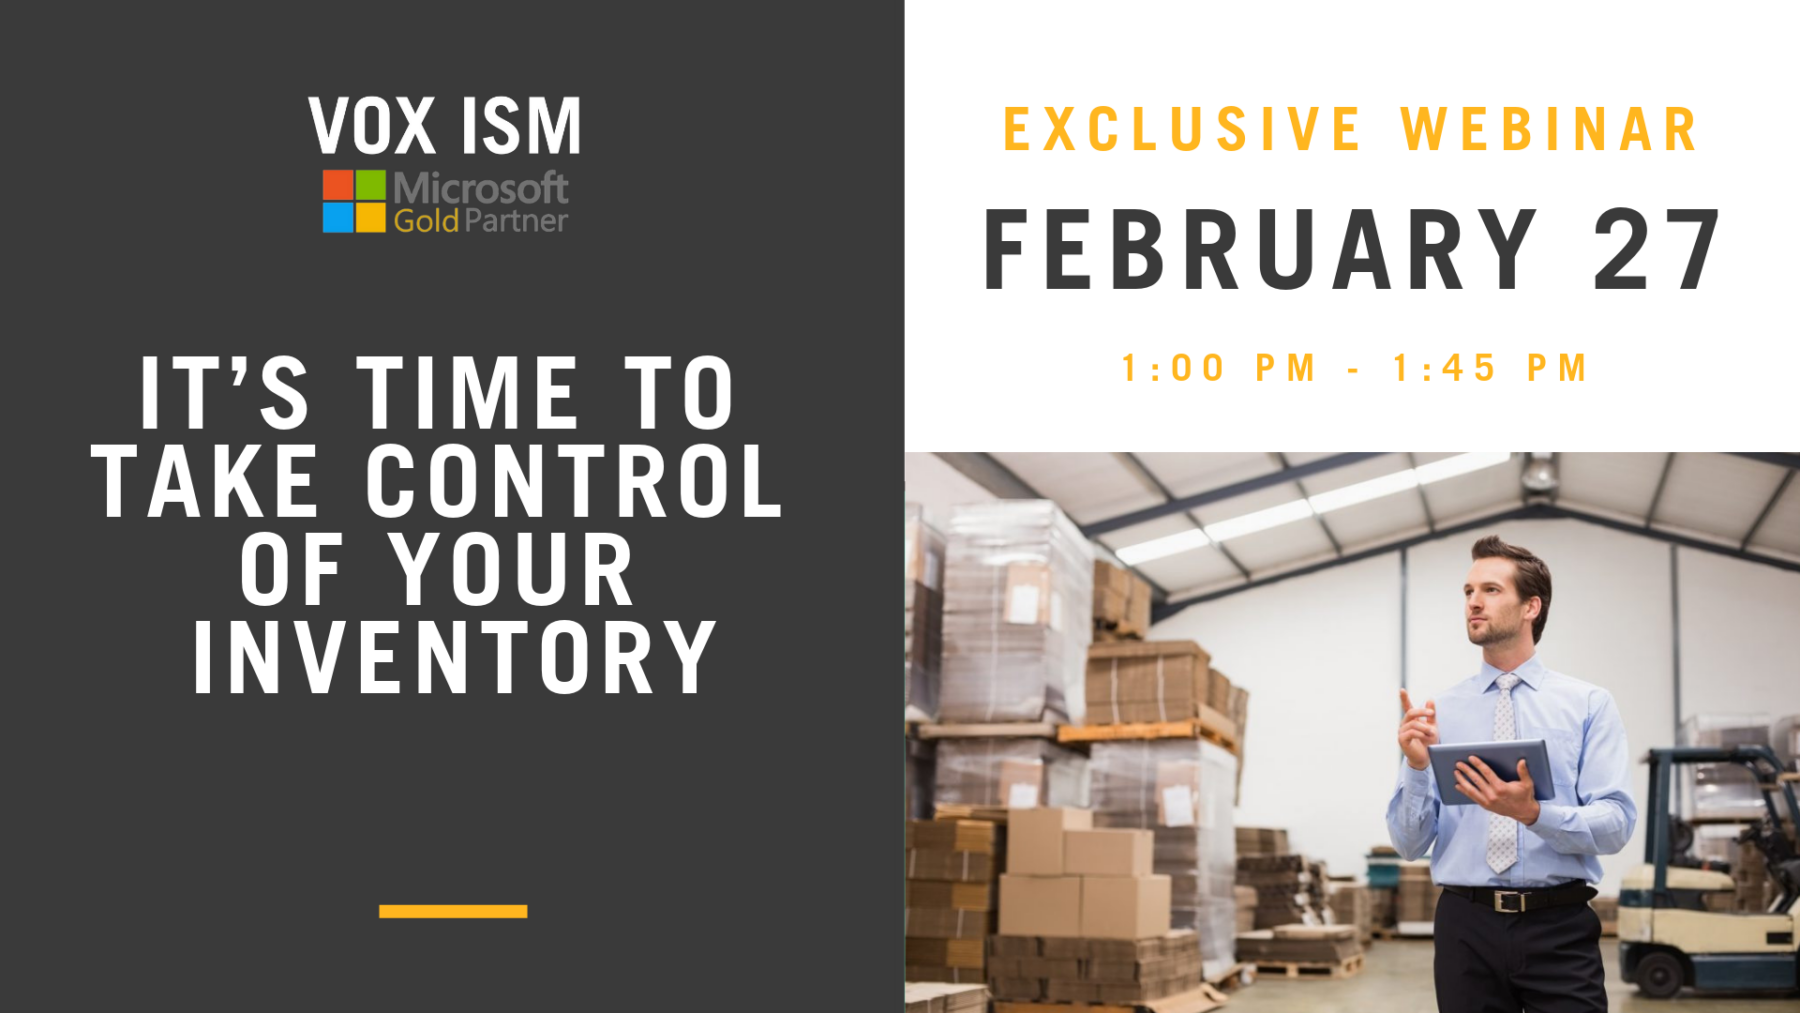 It’s Time to Take Control of Your Inventory - Vox ISM Webinar